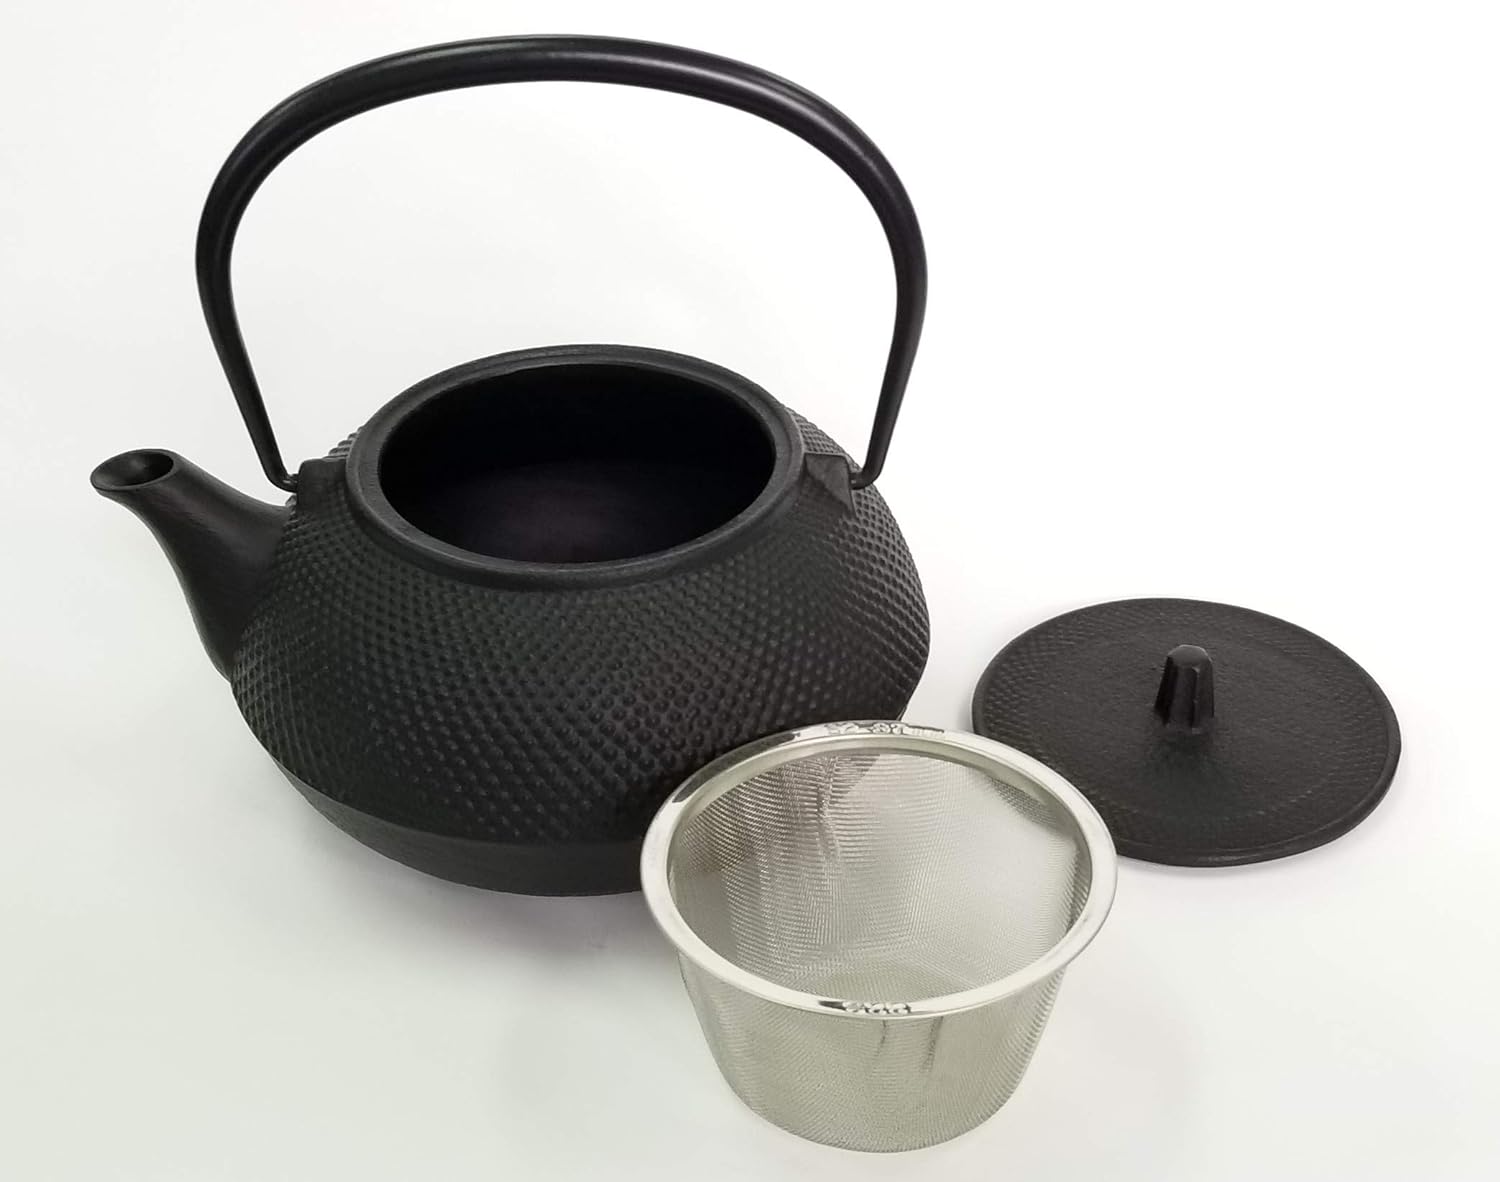 LMA Oriental Ceramic Tea Pot with Stainless Steel Infuser - 1 L